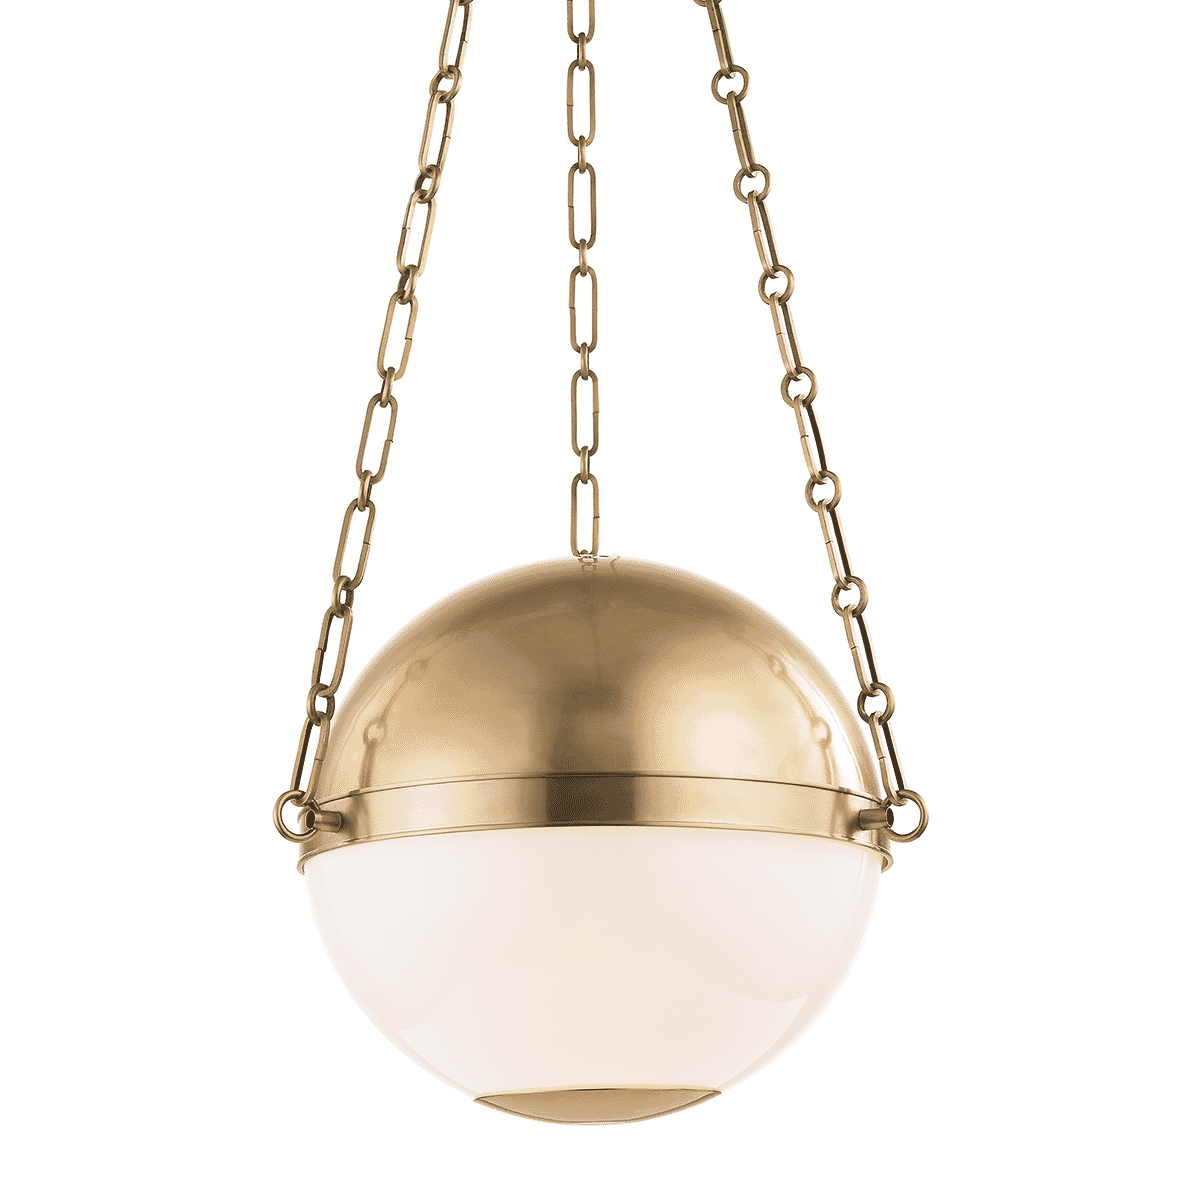 Hudson Valley Sphere No.2 by Mark D. Sikes 16.5"" Globe Pendant in Aged Brass -  MDS750-AGB